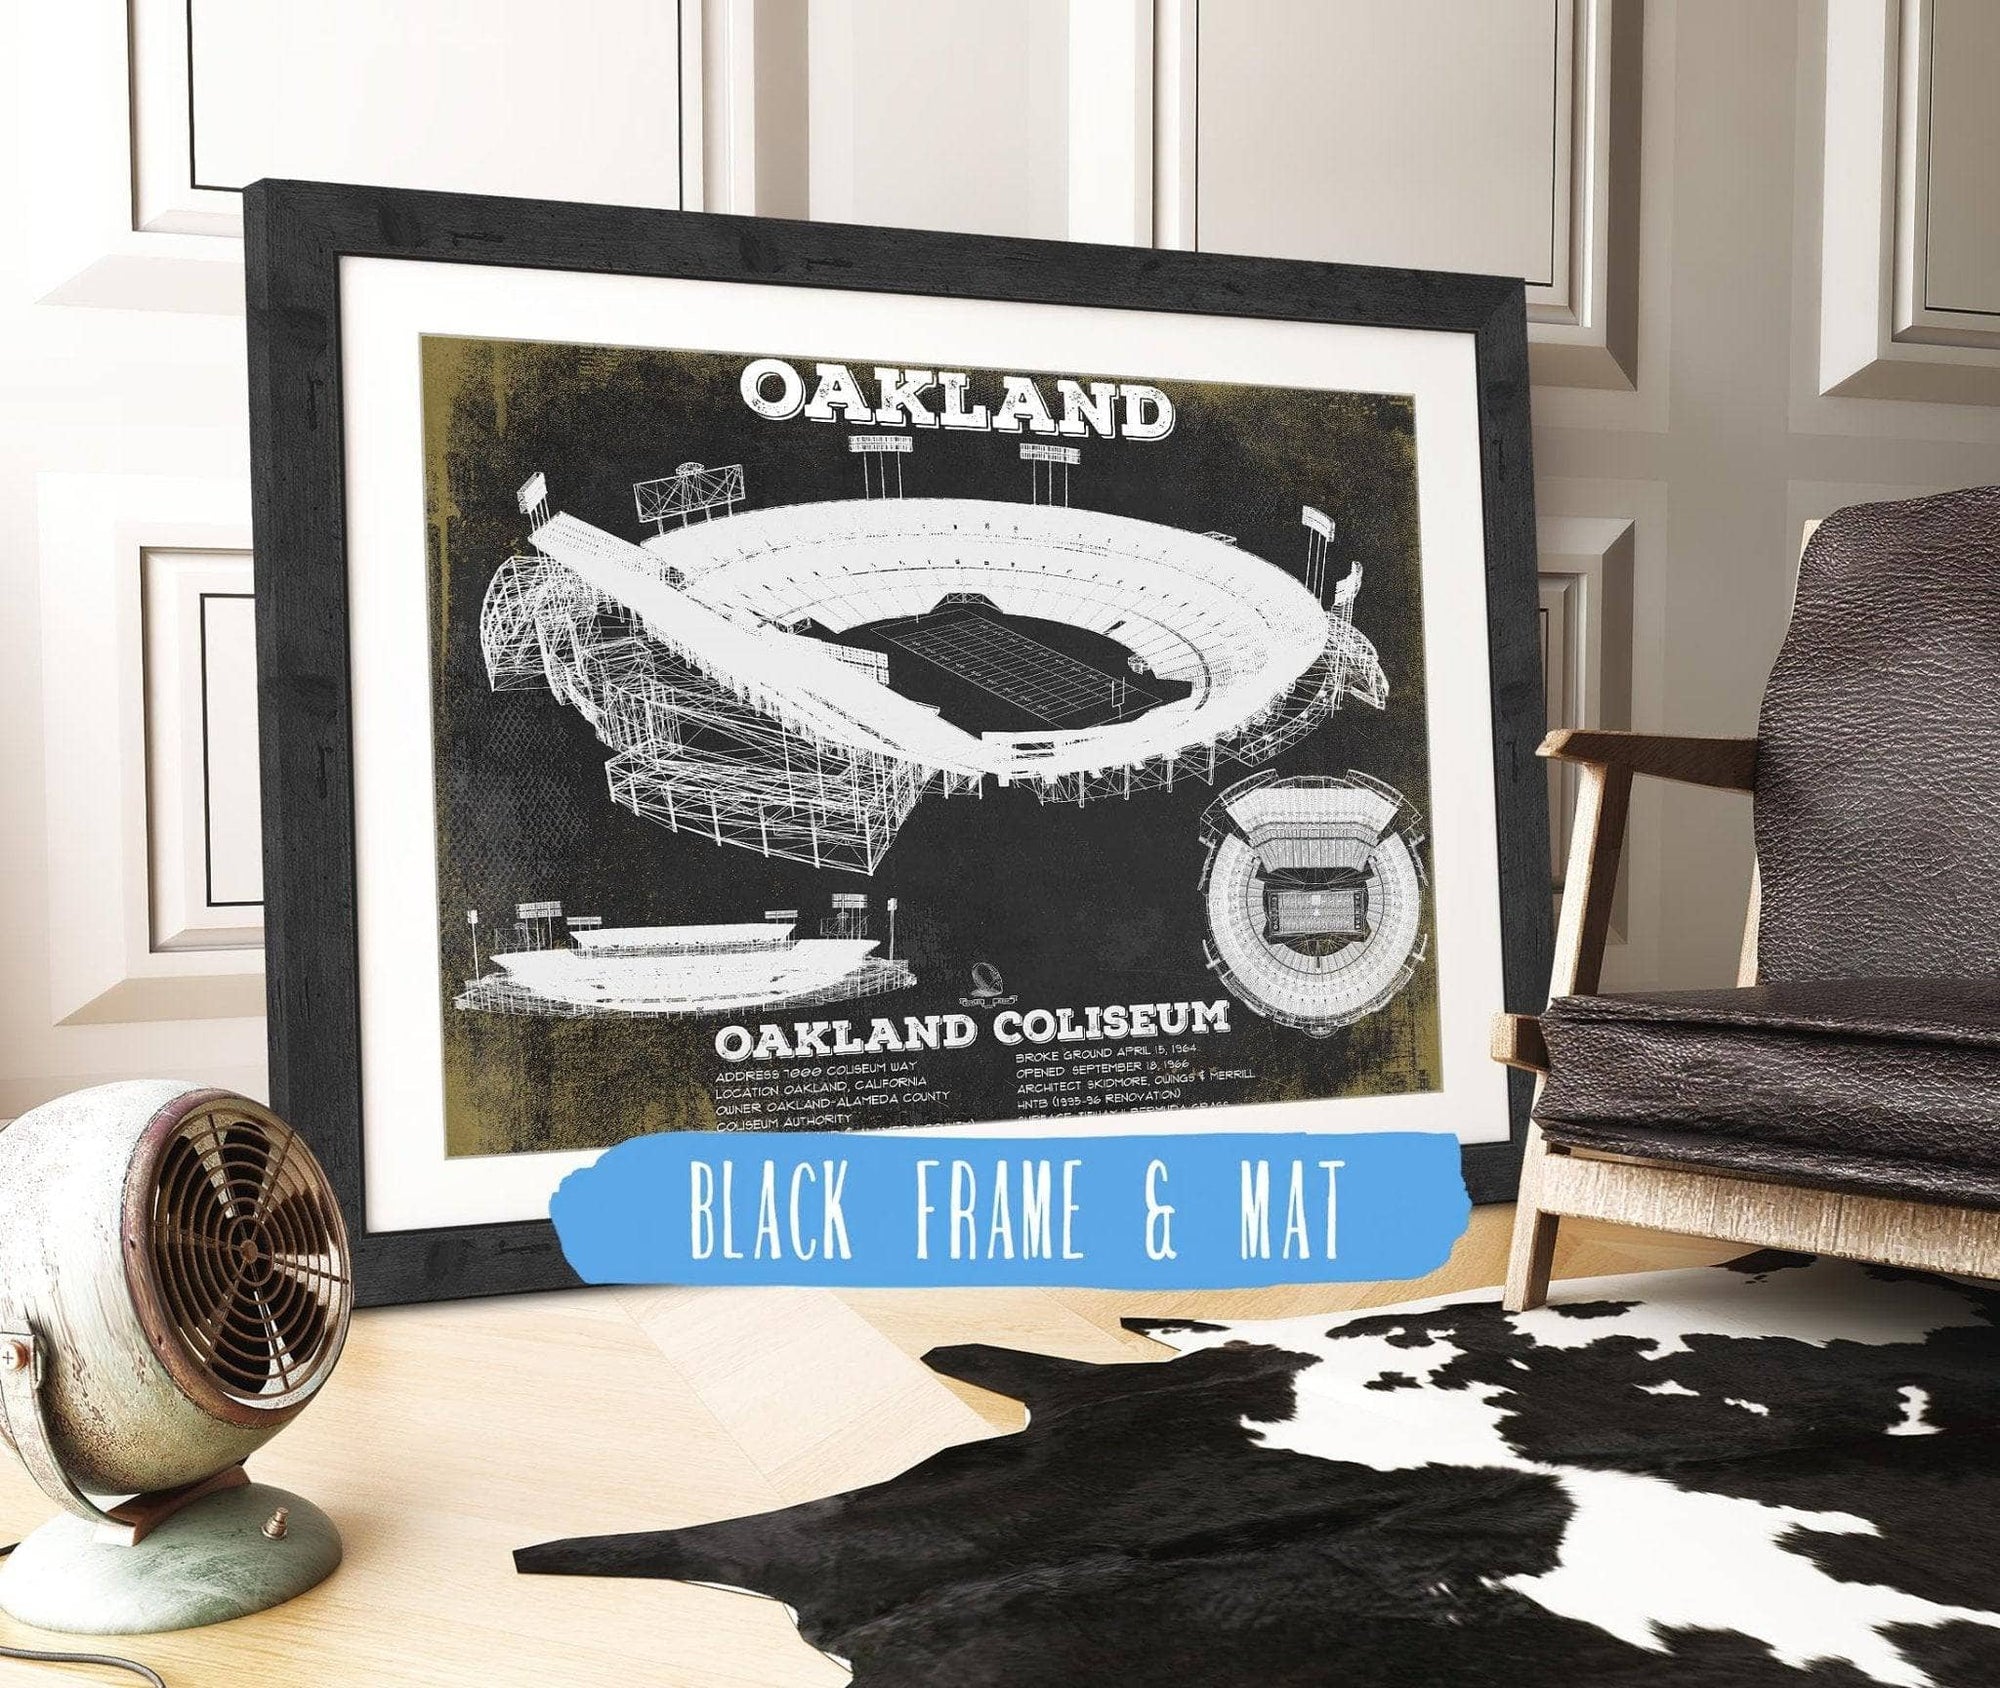 Cutler West Pro Football Collection 14" x 11" / Black Frame & Mat Oakland Raiders Team Color Alameda County Coliseum Seating Chart - Vintage Football Print 920787395-TOP_70363